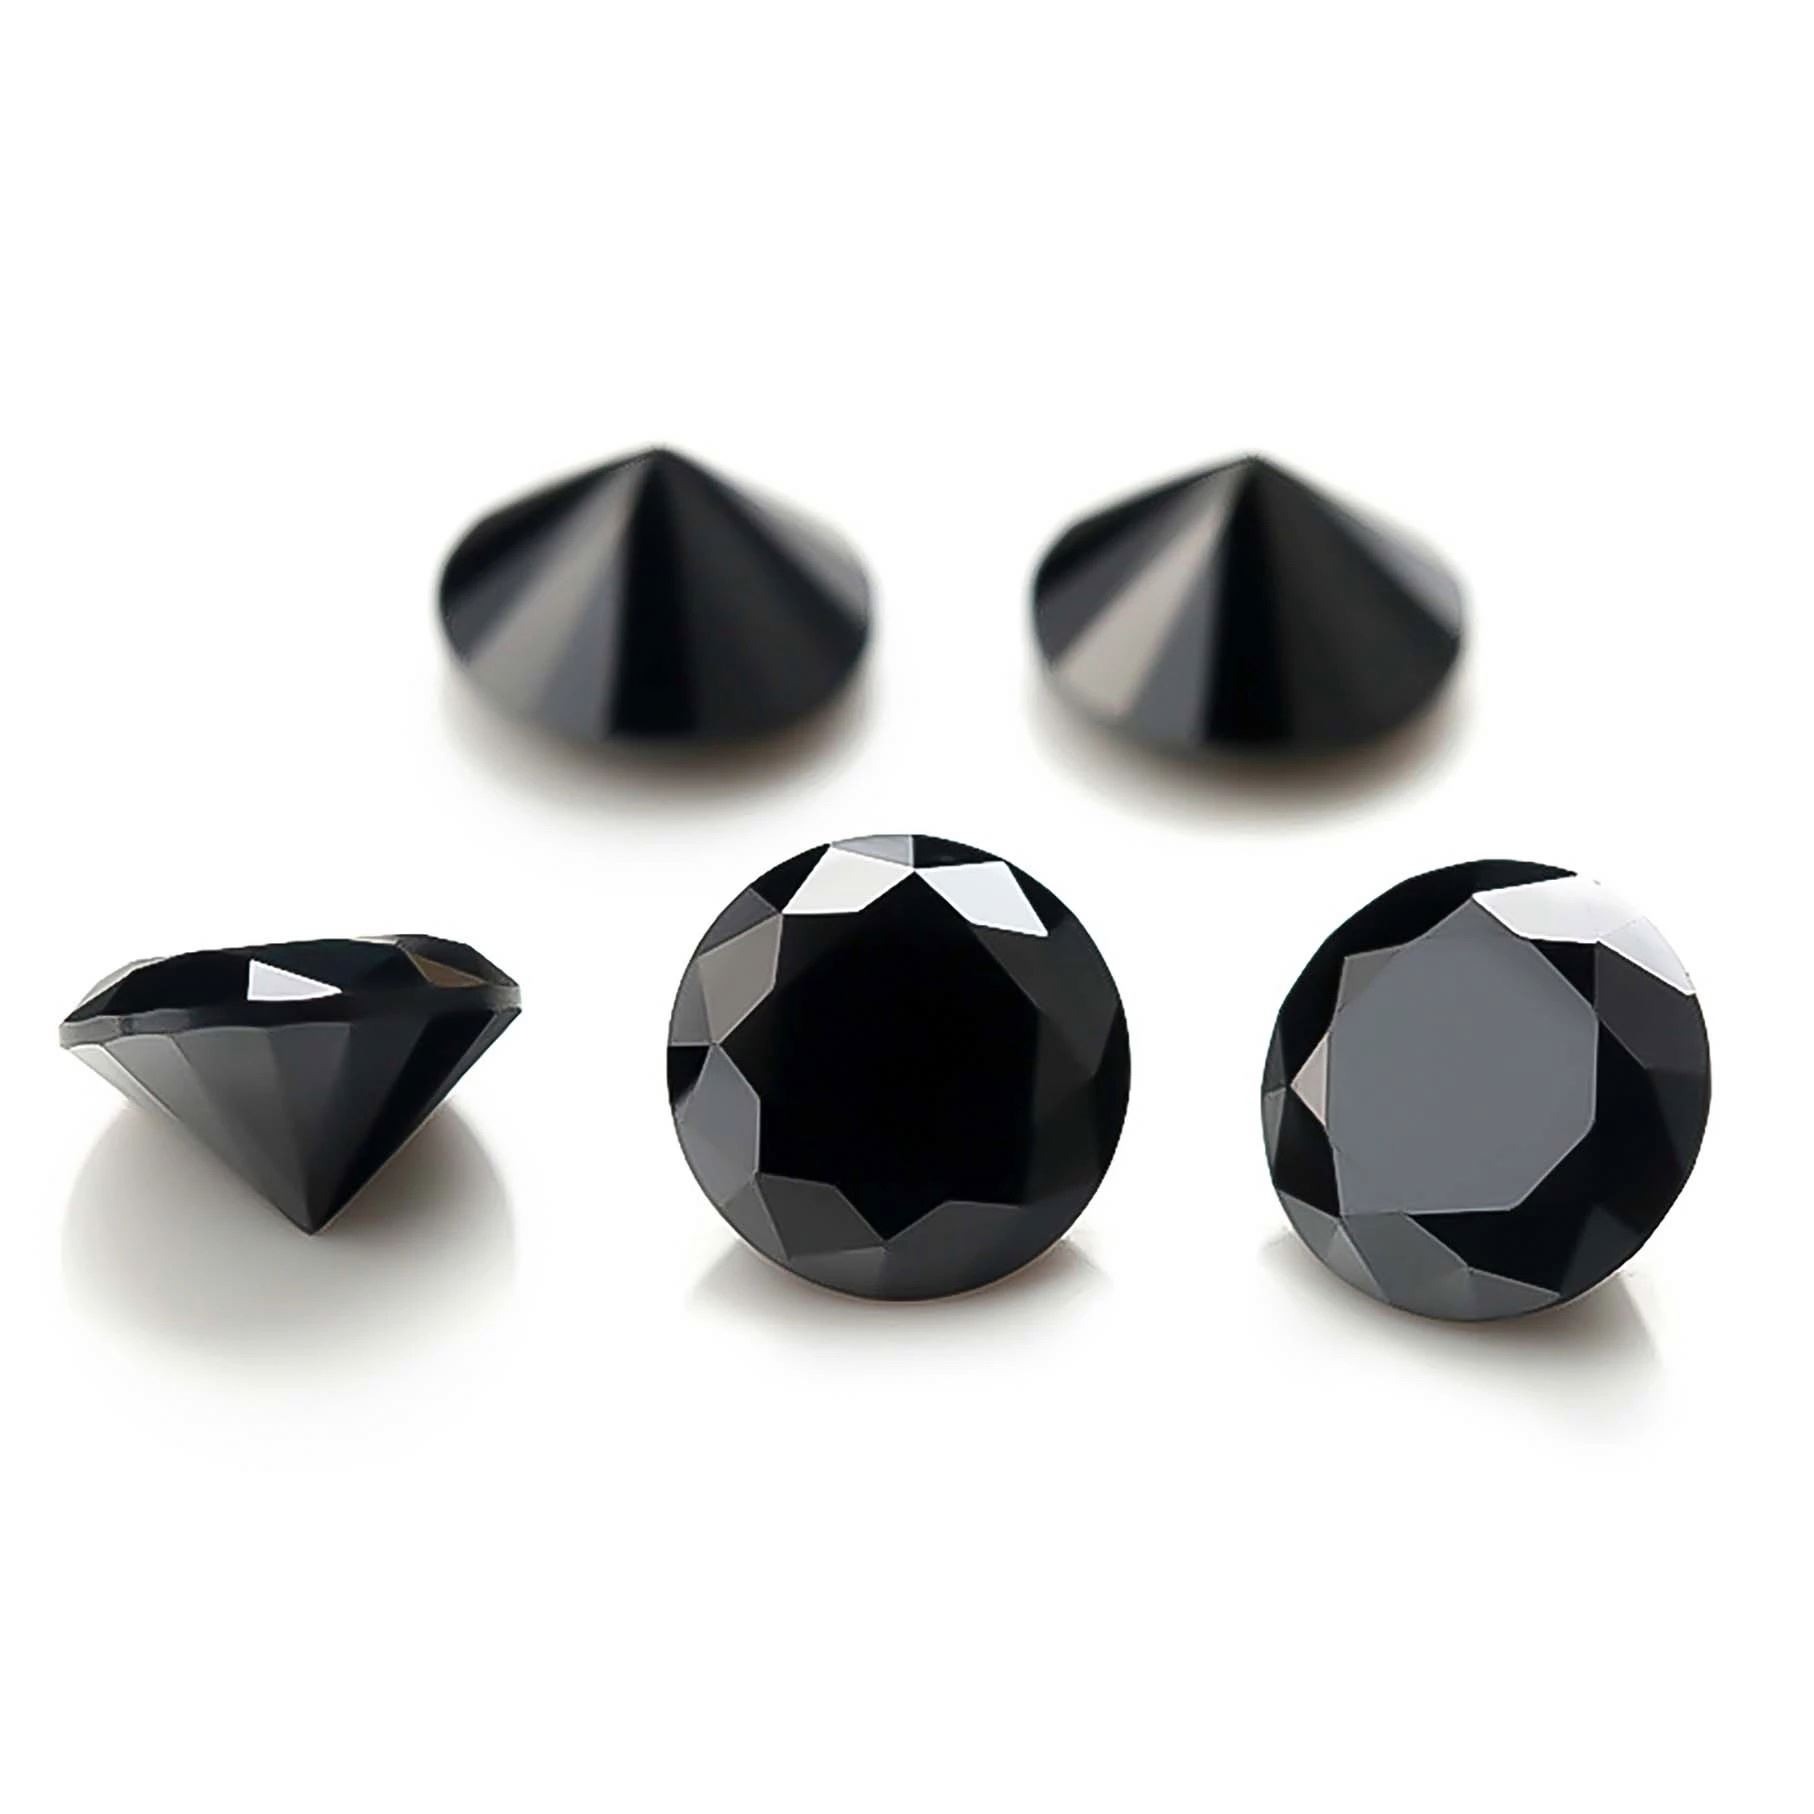 Black-Spinel-Round-Faceted-Cut-Gemstones-China-Supplier